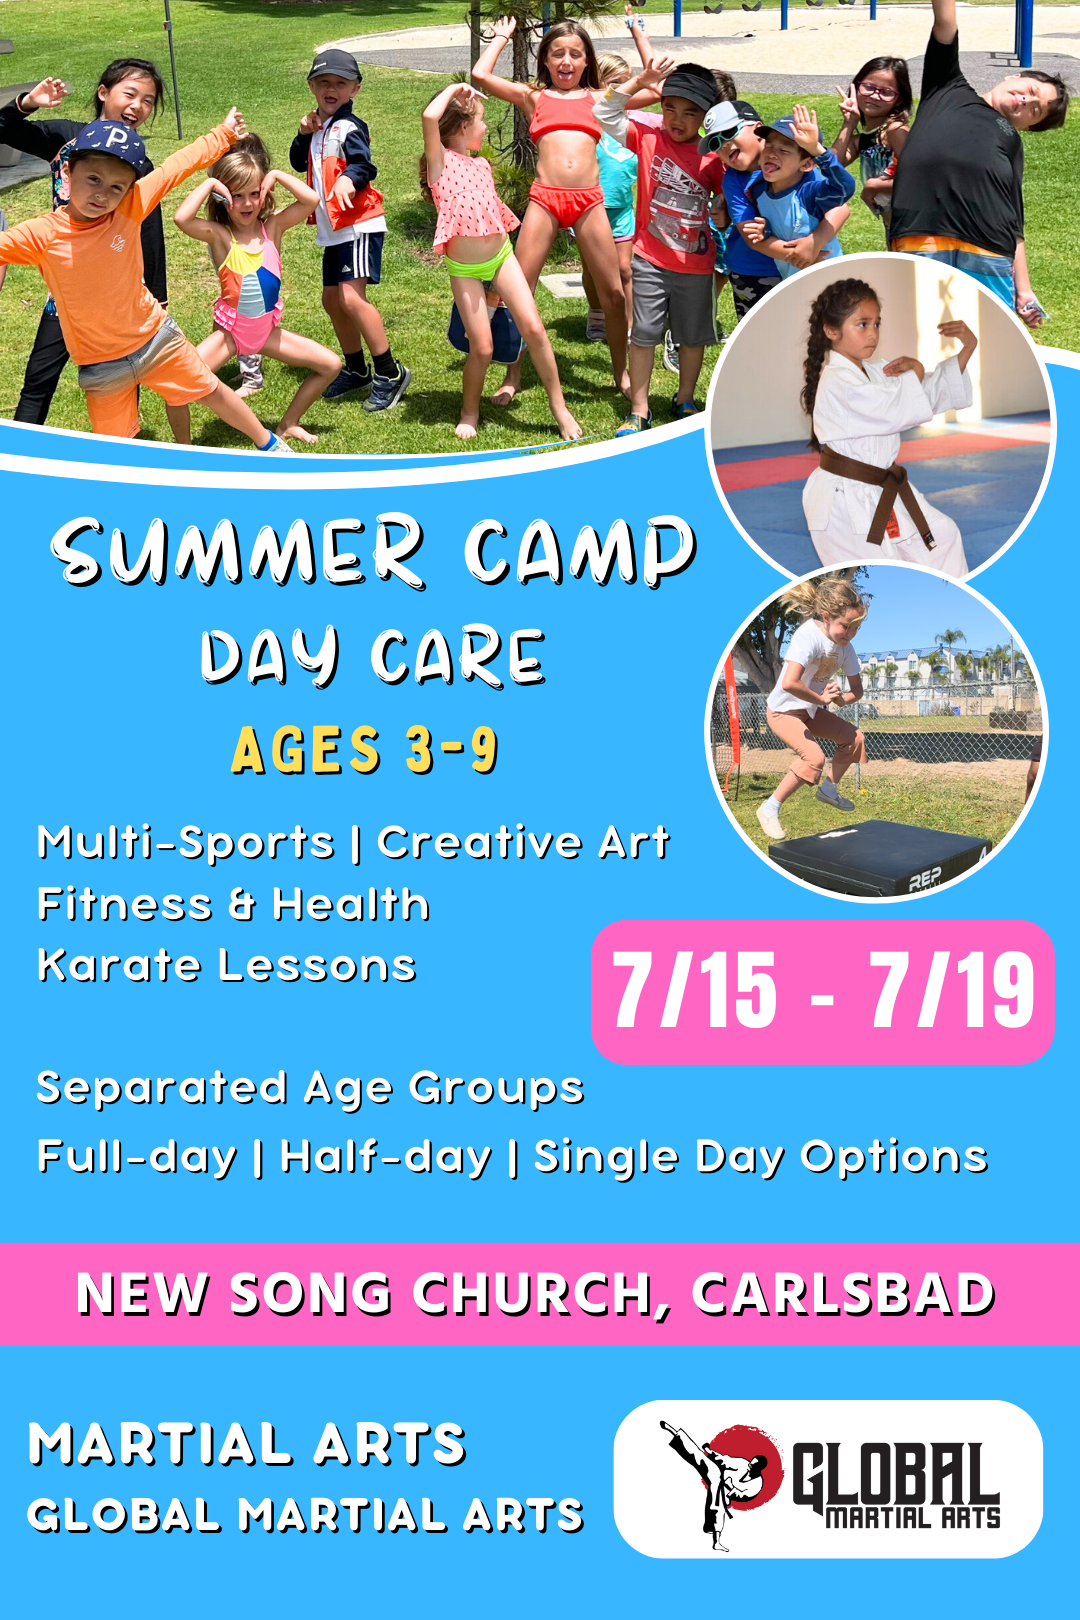 7/15 - 7/19 | Mon - Fri | 8:30 - 4:00<br>Multi-Sports, Art, and Martial Arts<br>New Song Church, Carlsbad<br>Ages 3-9 | Separated Age Groups